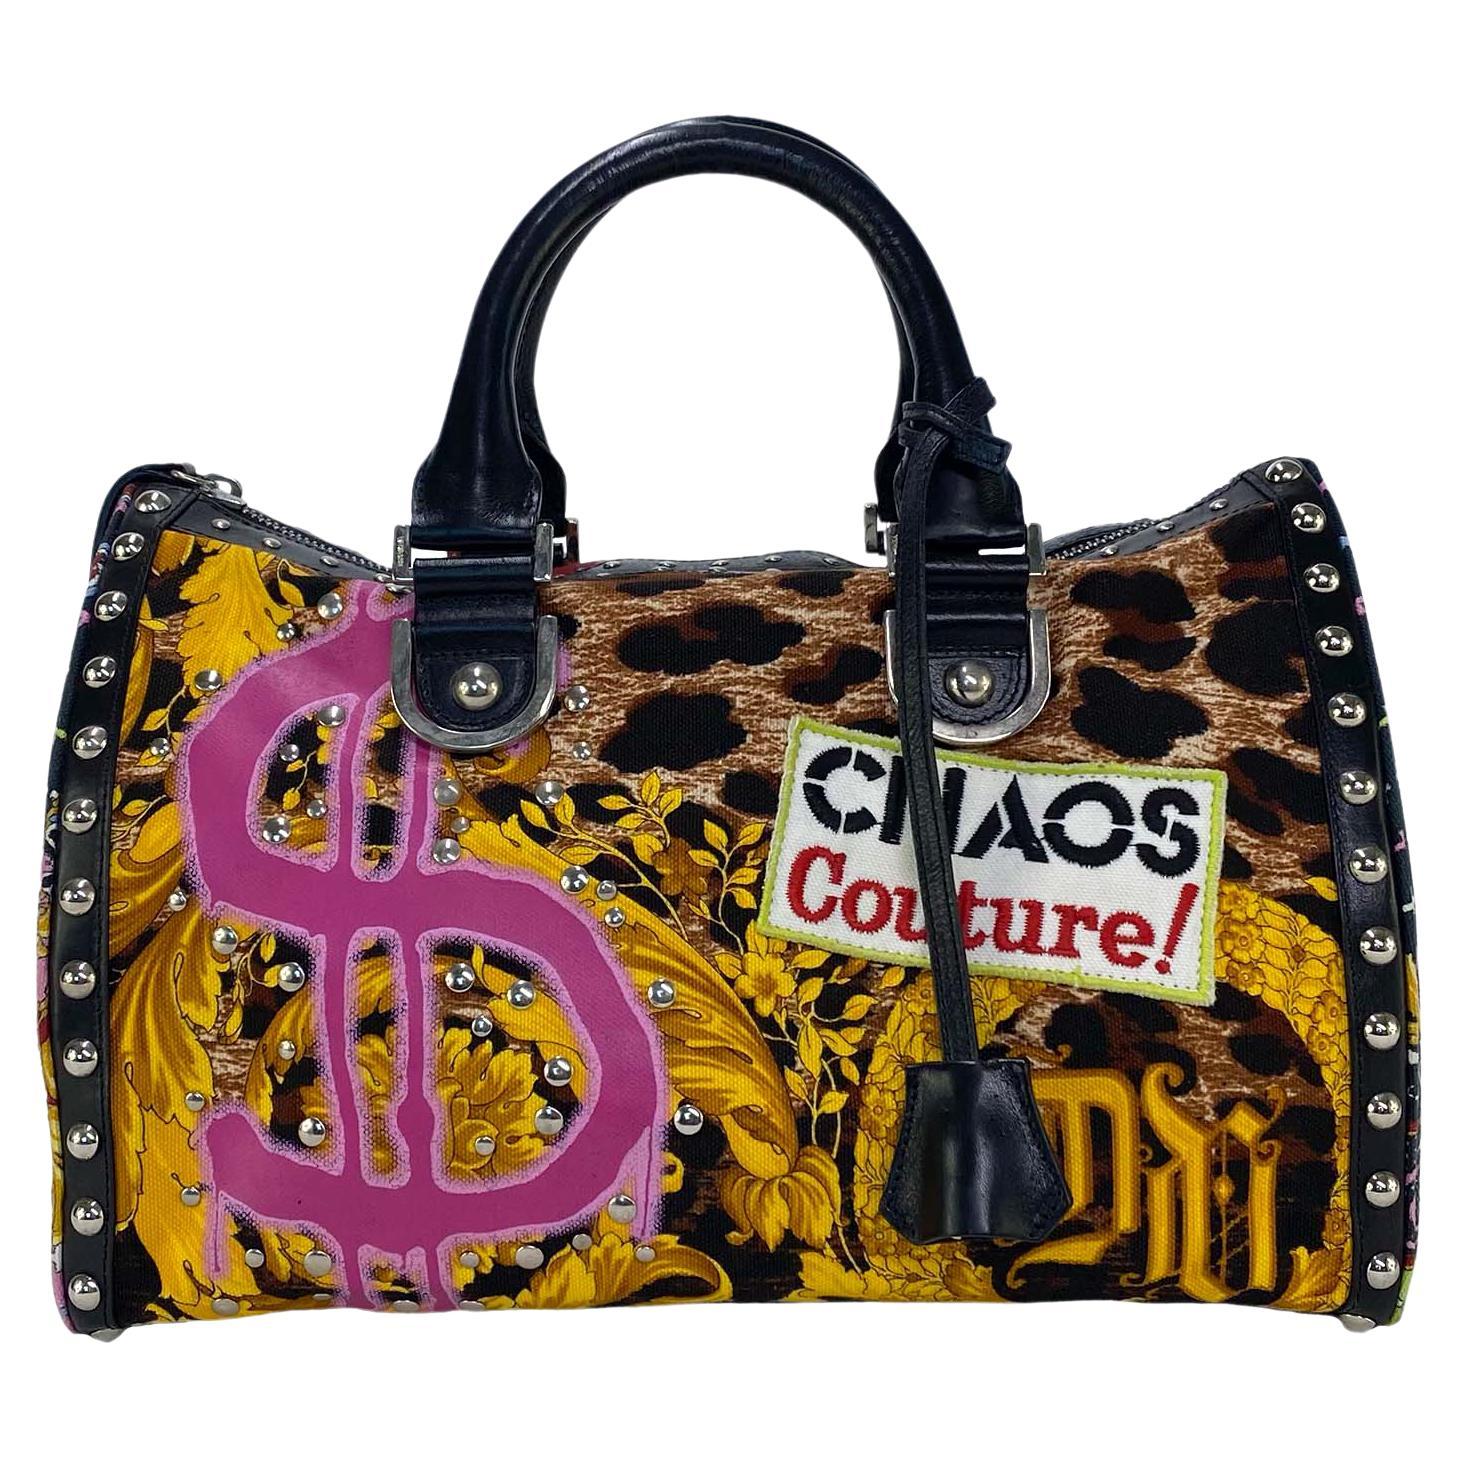 S/S 2005 Versace Chaos Couture Studded Archival Print Boston Bag Runway